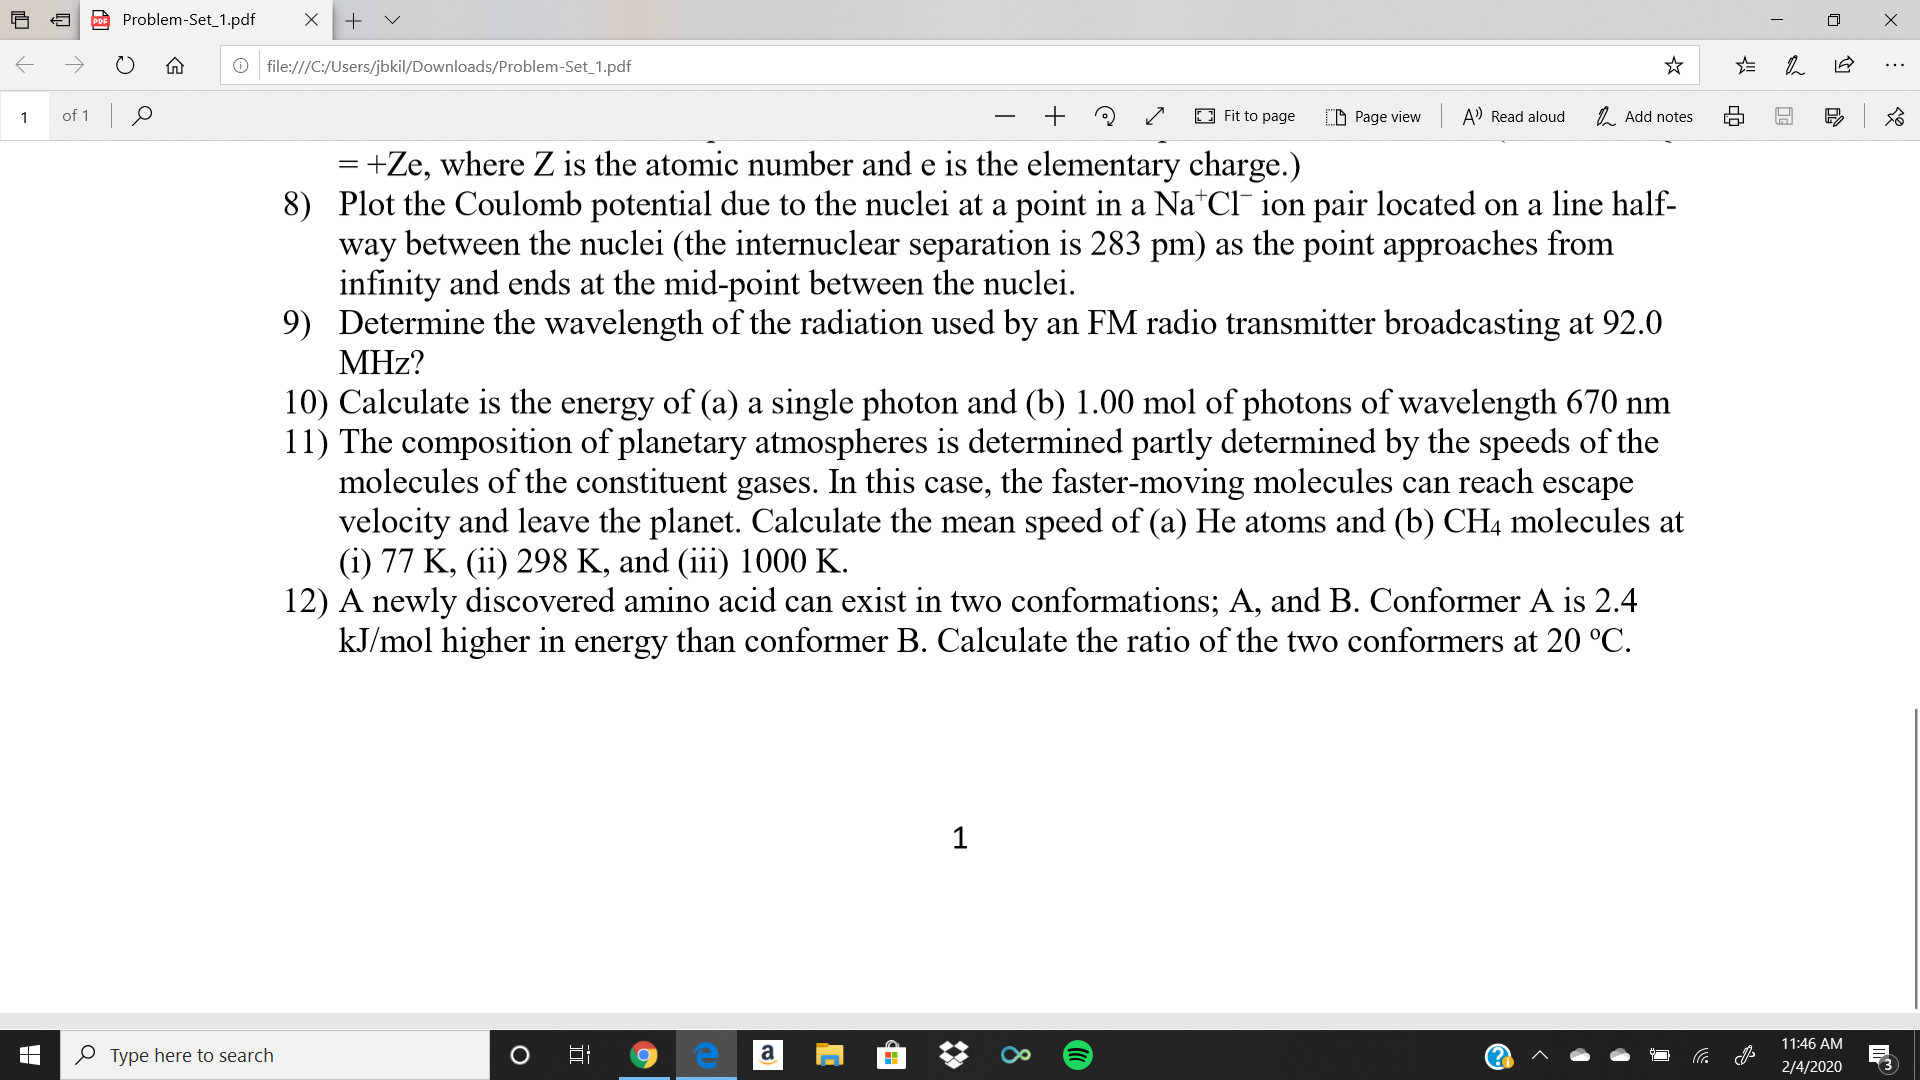 Problem-Set_1.pdf
O file:///C:/Users/jbkil/Downloads/Problem-Set_1.pdf
of 1 0
A' Read aloud
1. Add notes
E Fit to page
D Page view
= +Ze, where Z is the atomic number and e is the elementary charge.)
8) Plot the Coulomb potential due to the nuclei at a point in a Na*Cl¯ ion pair located on a line half-
way between the nuclei (the internuclear separation is 283 pm) as the point approaches from
infinity and ends at the mid-point between the nuclei.
9) Determine the wavelength of the radiation used by an FM radio transmitter broadcasting at 92.0
MHz?
10) Calculate is the energy of (a) a single photon and (b) 1.00 mol of photons of wavelength 670 nm
11) The composition of planetary atmospheres is determined partly determined by the speeds of the
molecules of the constituent gases. In this case, the faster-moving molecules can reach escape
velocity and leave the planet. Calculate the mean speed of (a) He atoms and (b) CH4 molecules at
(i) 77 K, (ii) 298 K, and (iii) 1000 K.
12) A newly discovered amino acid can exist in two conformations; A, and B. Conformer A is 2.4
kJ/mol higher in energy than conformer B. Calculate the ratio of the two conformers at 20 °C.
11:46 AM
a
O Type here to search
2/4/2020
